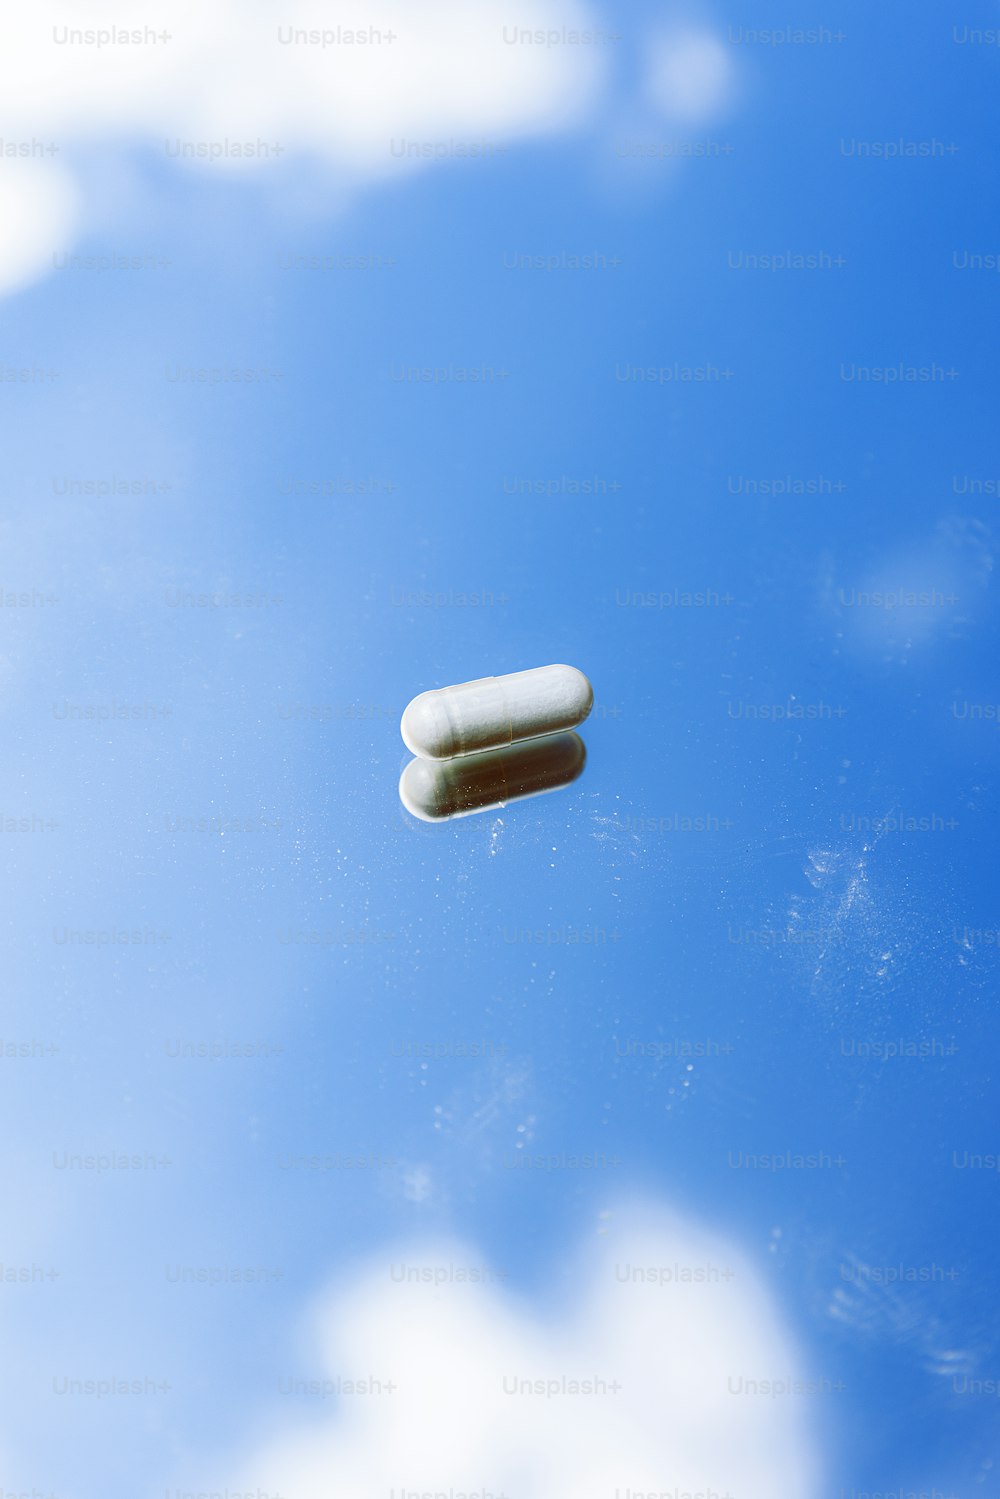 two pills floating in the air on a cloudy day